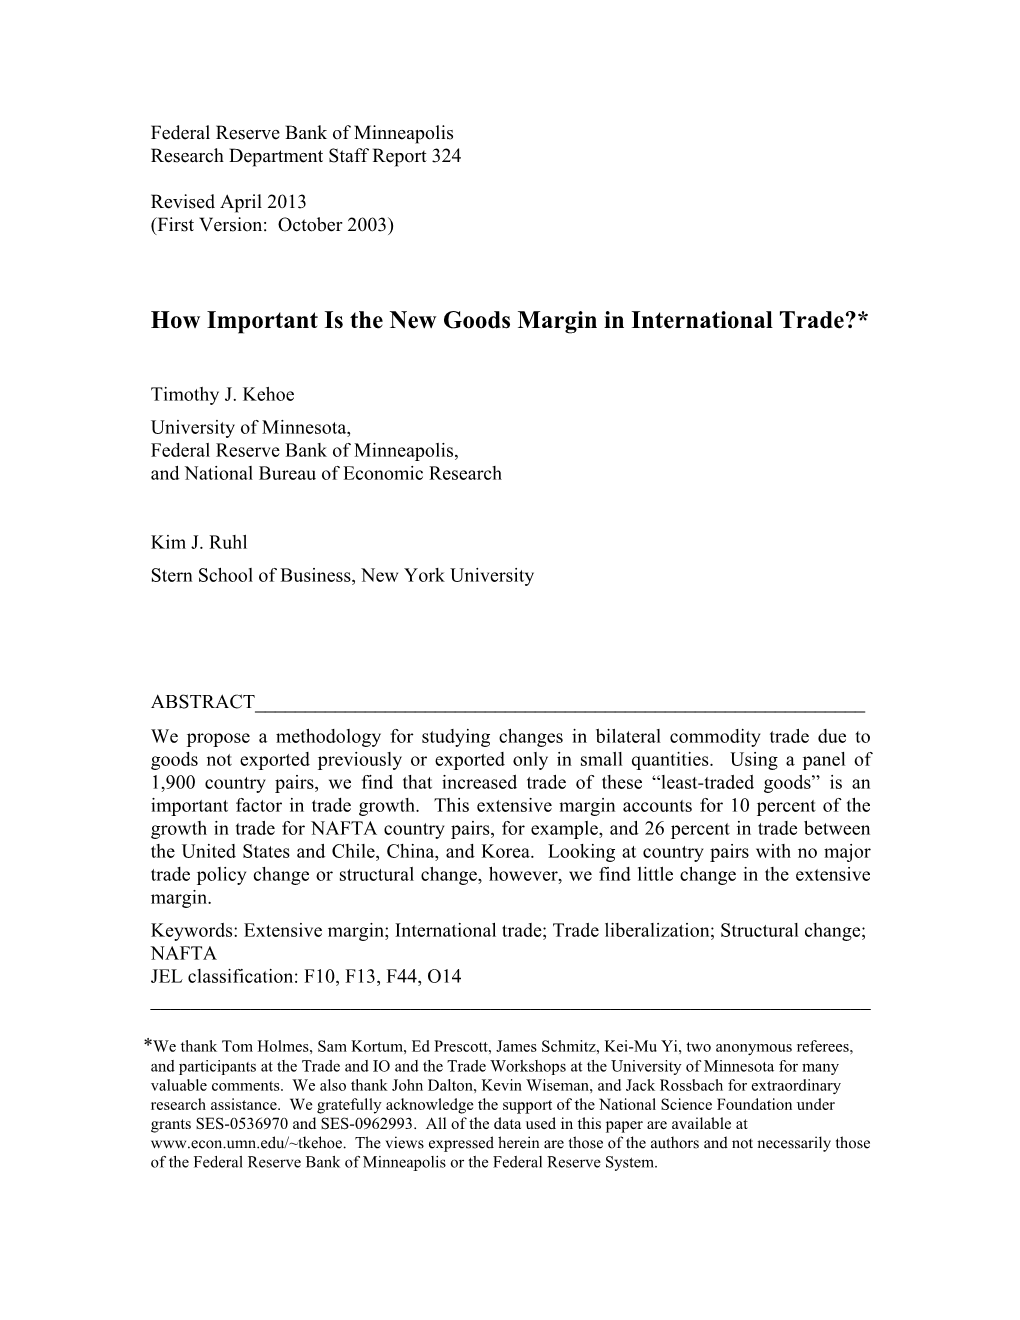 How Important Is the New Goods Margin in International Trade?*